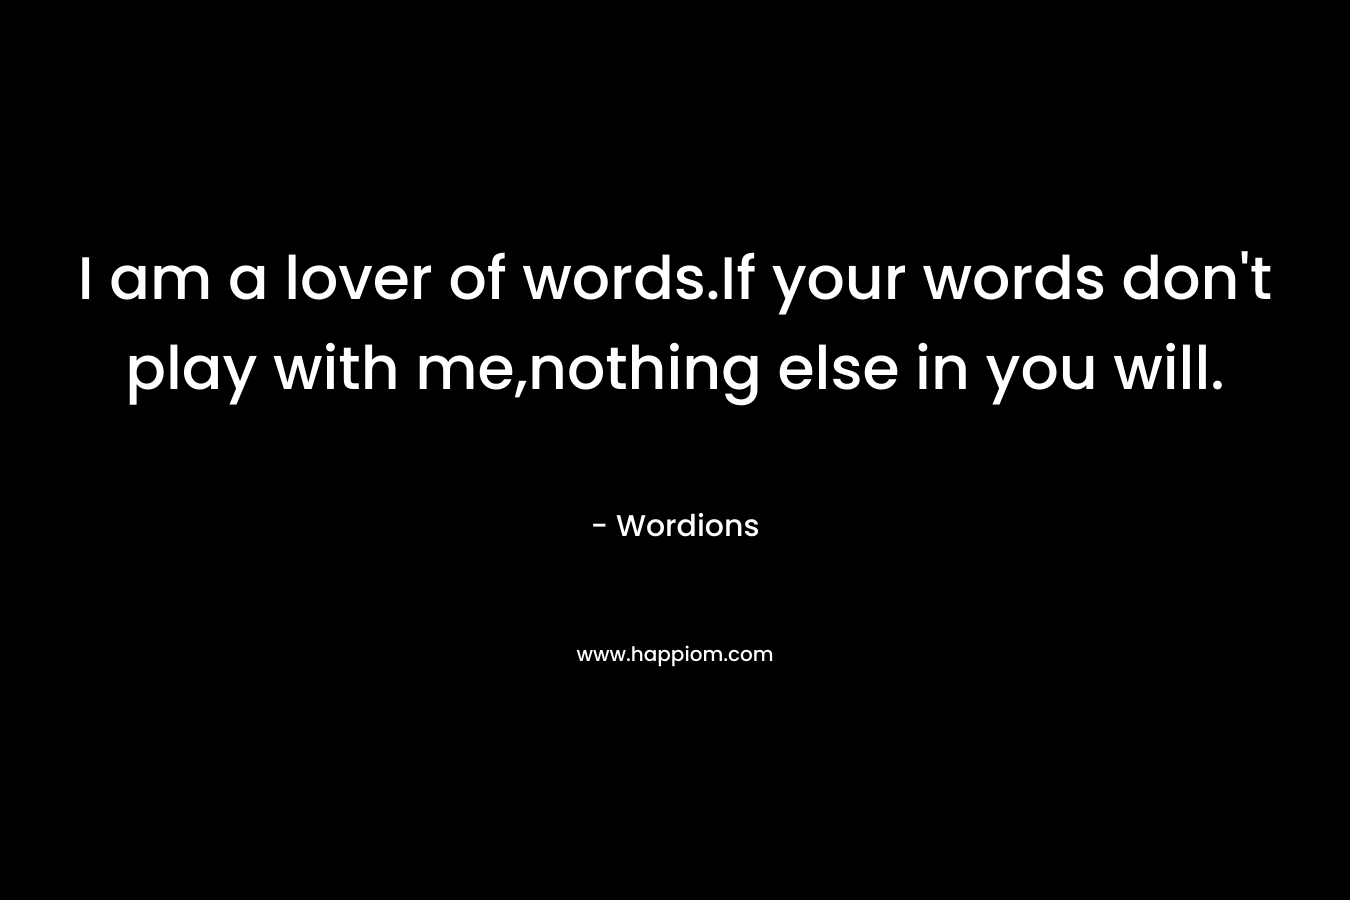 I am a lover of words.If your words don't play with me,nothing else in you will.